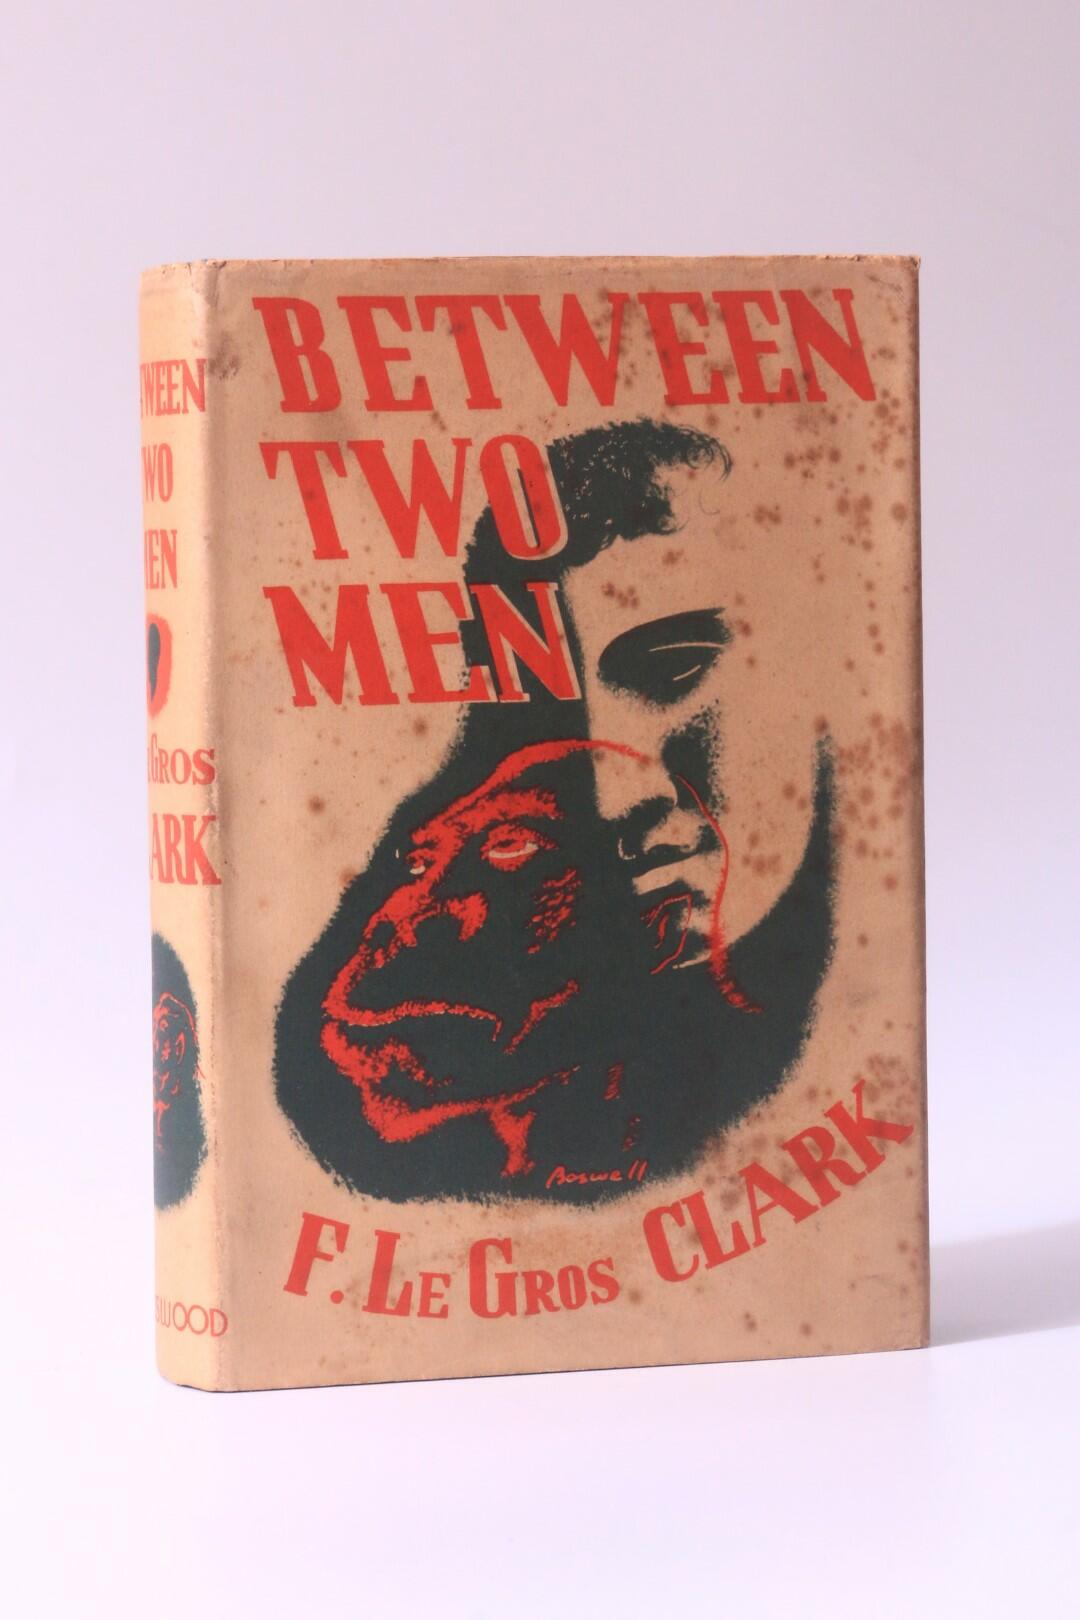 F. Le Gros - Between Two Men - Boriswood, 1935, First Edition.